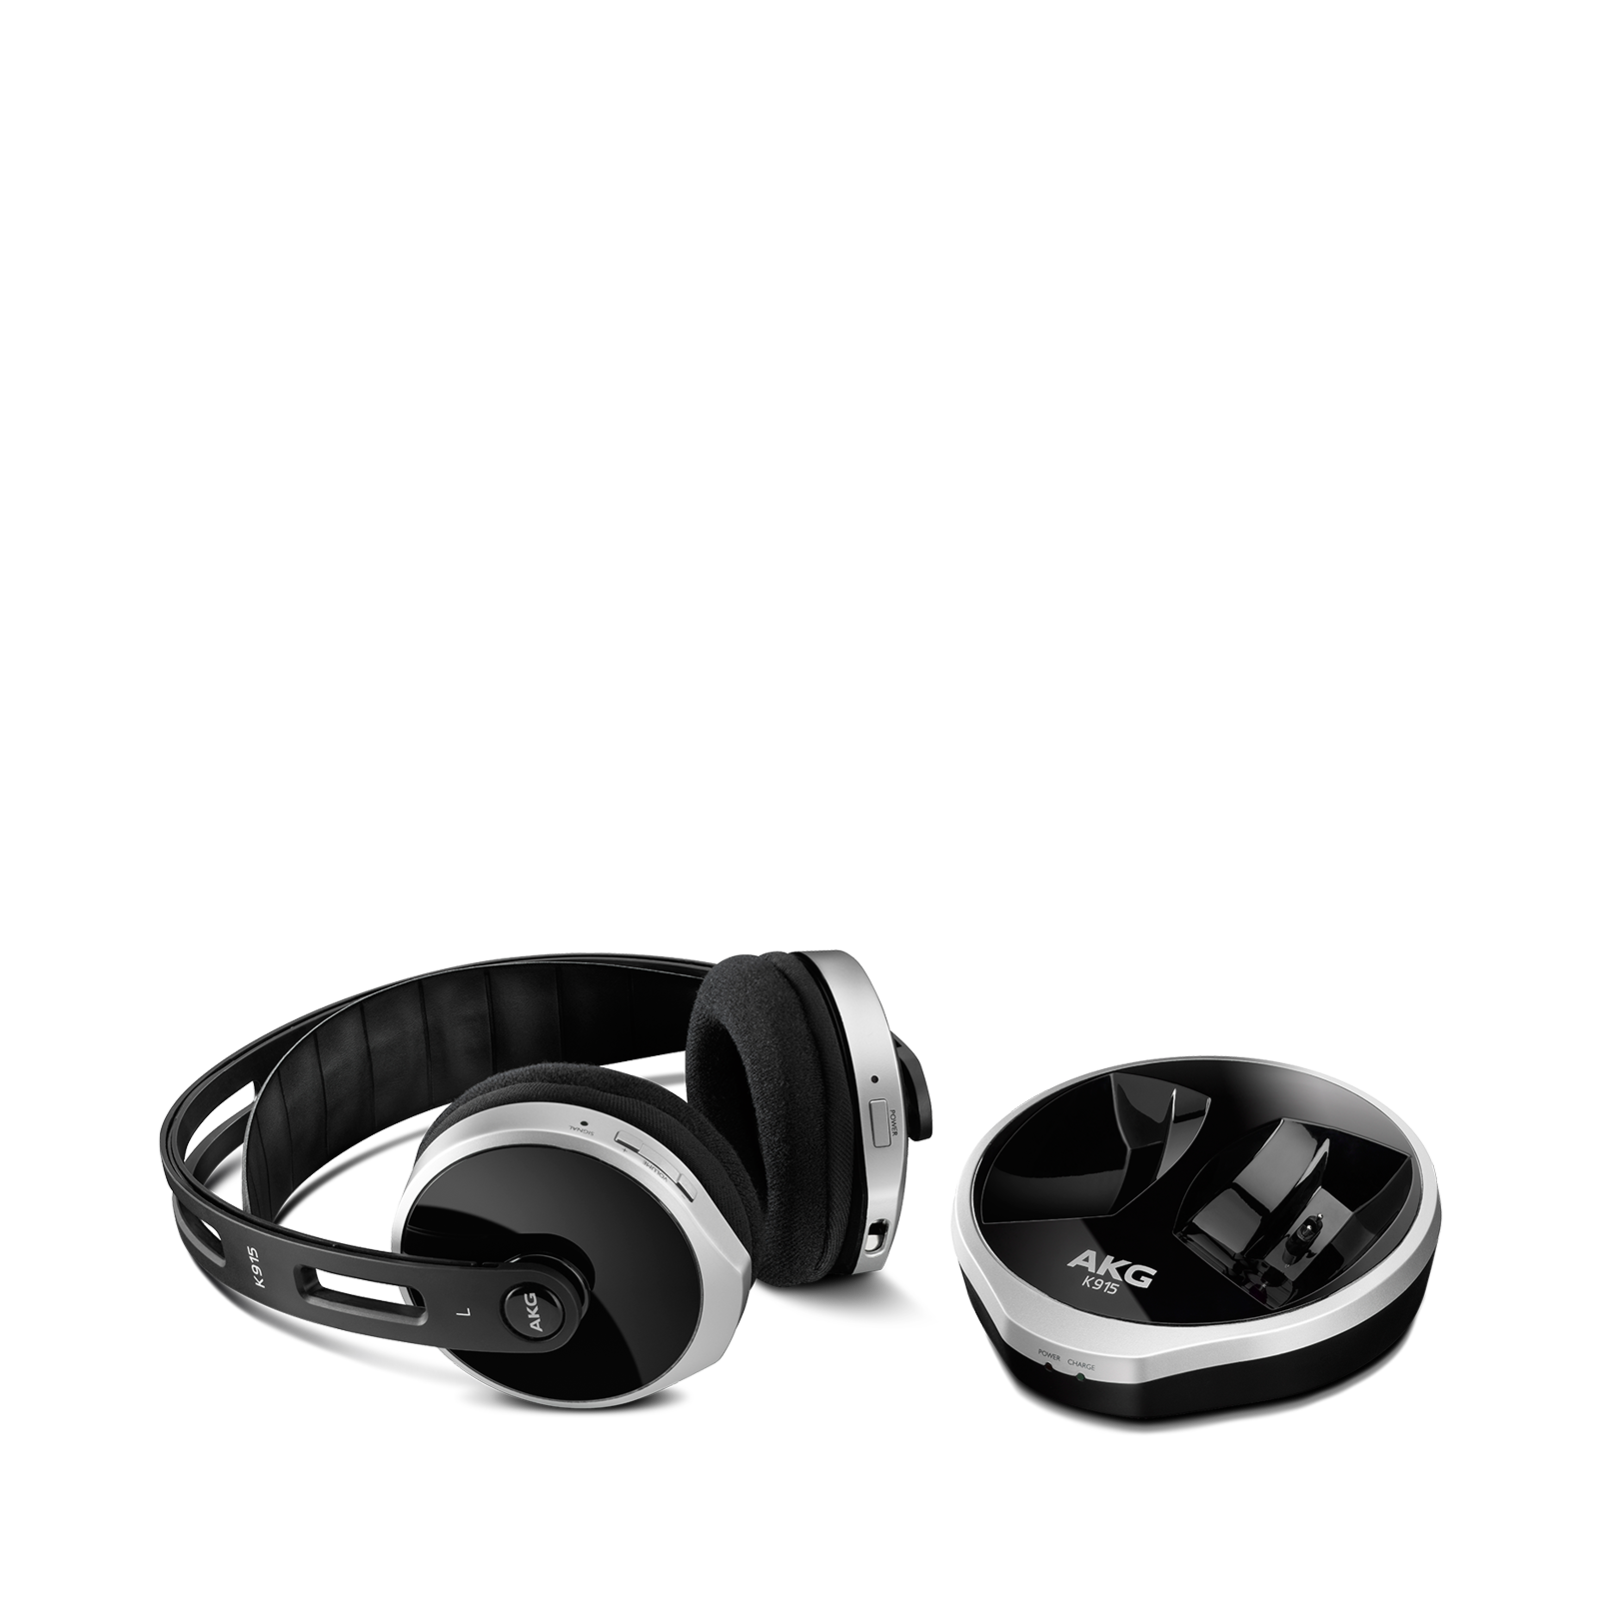 K 915 - Black - Digital wireless stereo headphone optimized for movies, games and music. - Detailshot 6